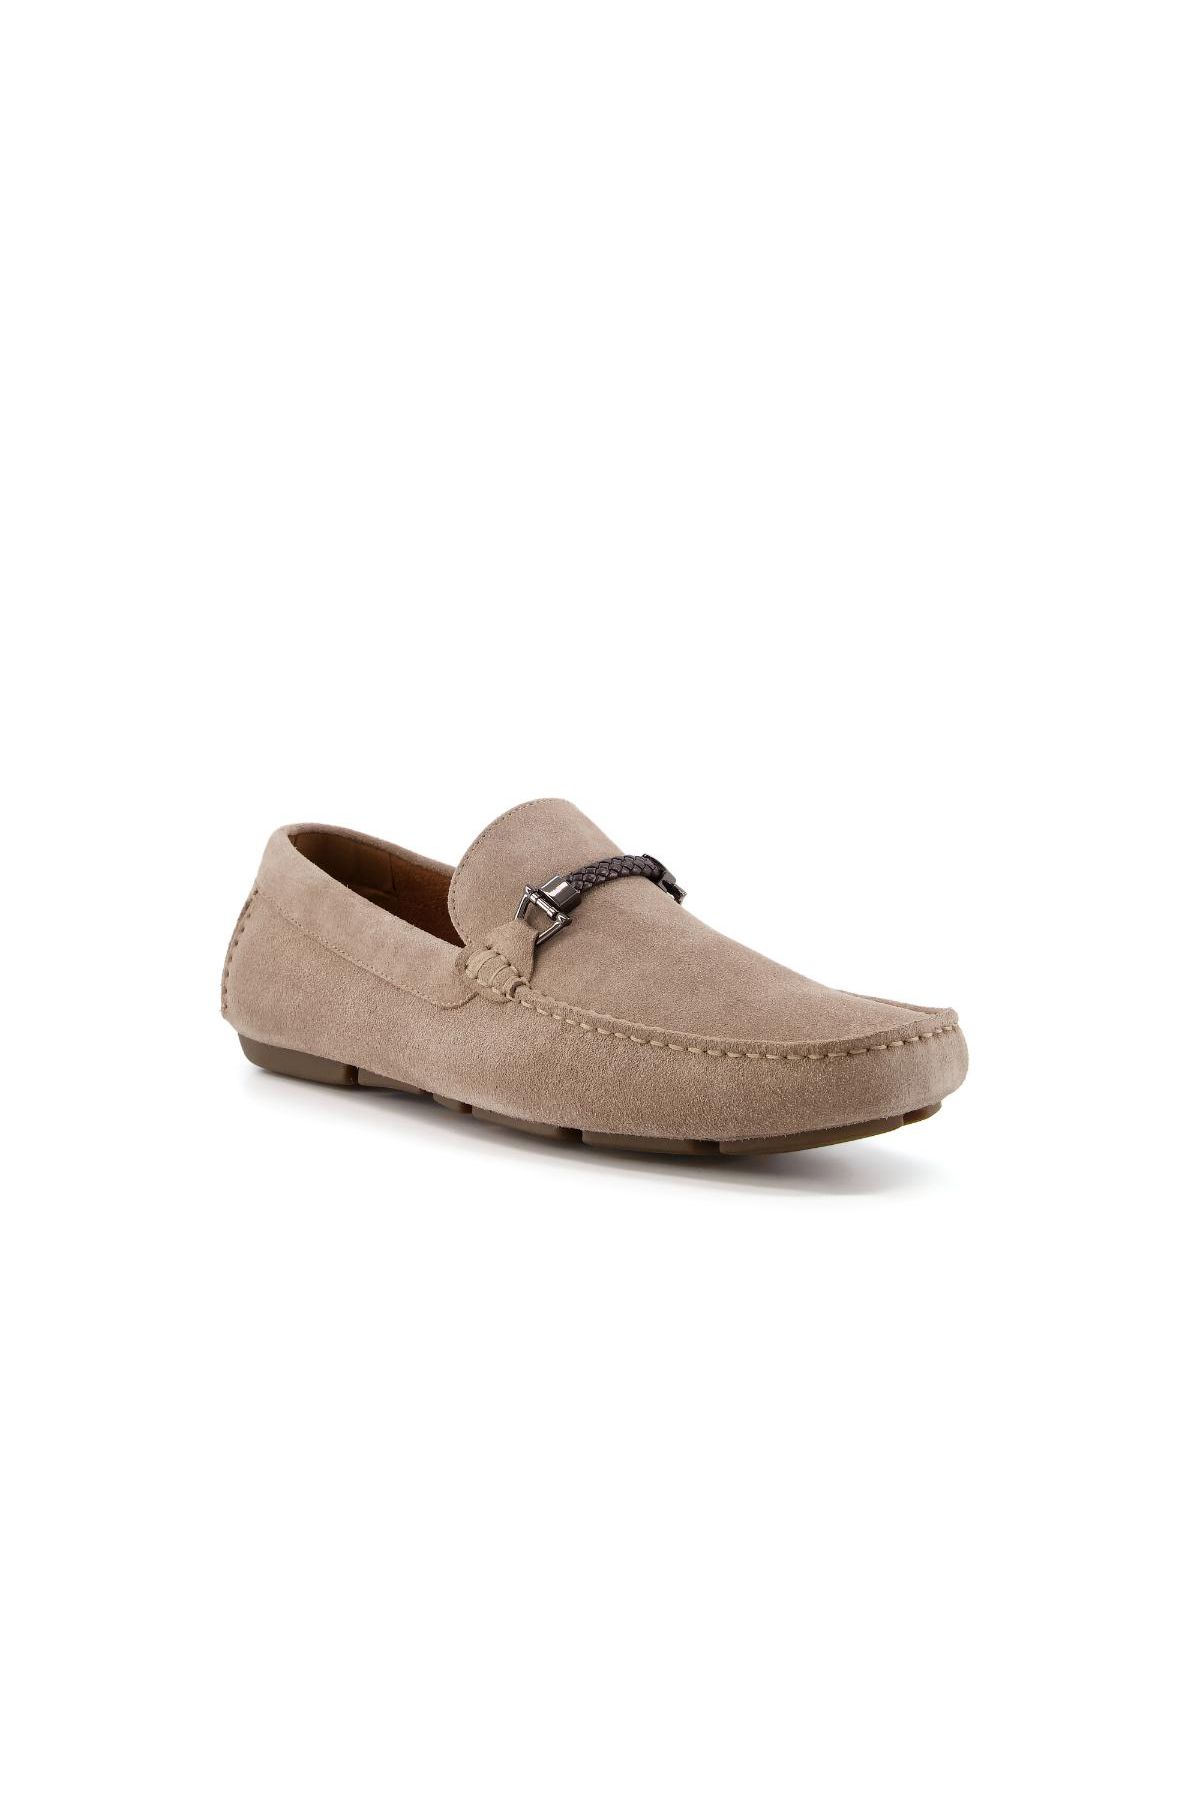 Dune London Beacons Taupe Men Loafers